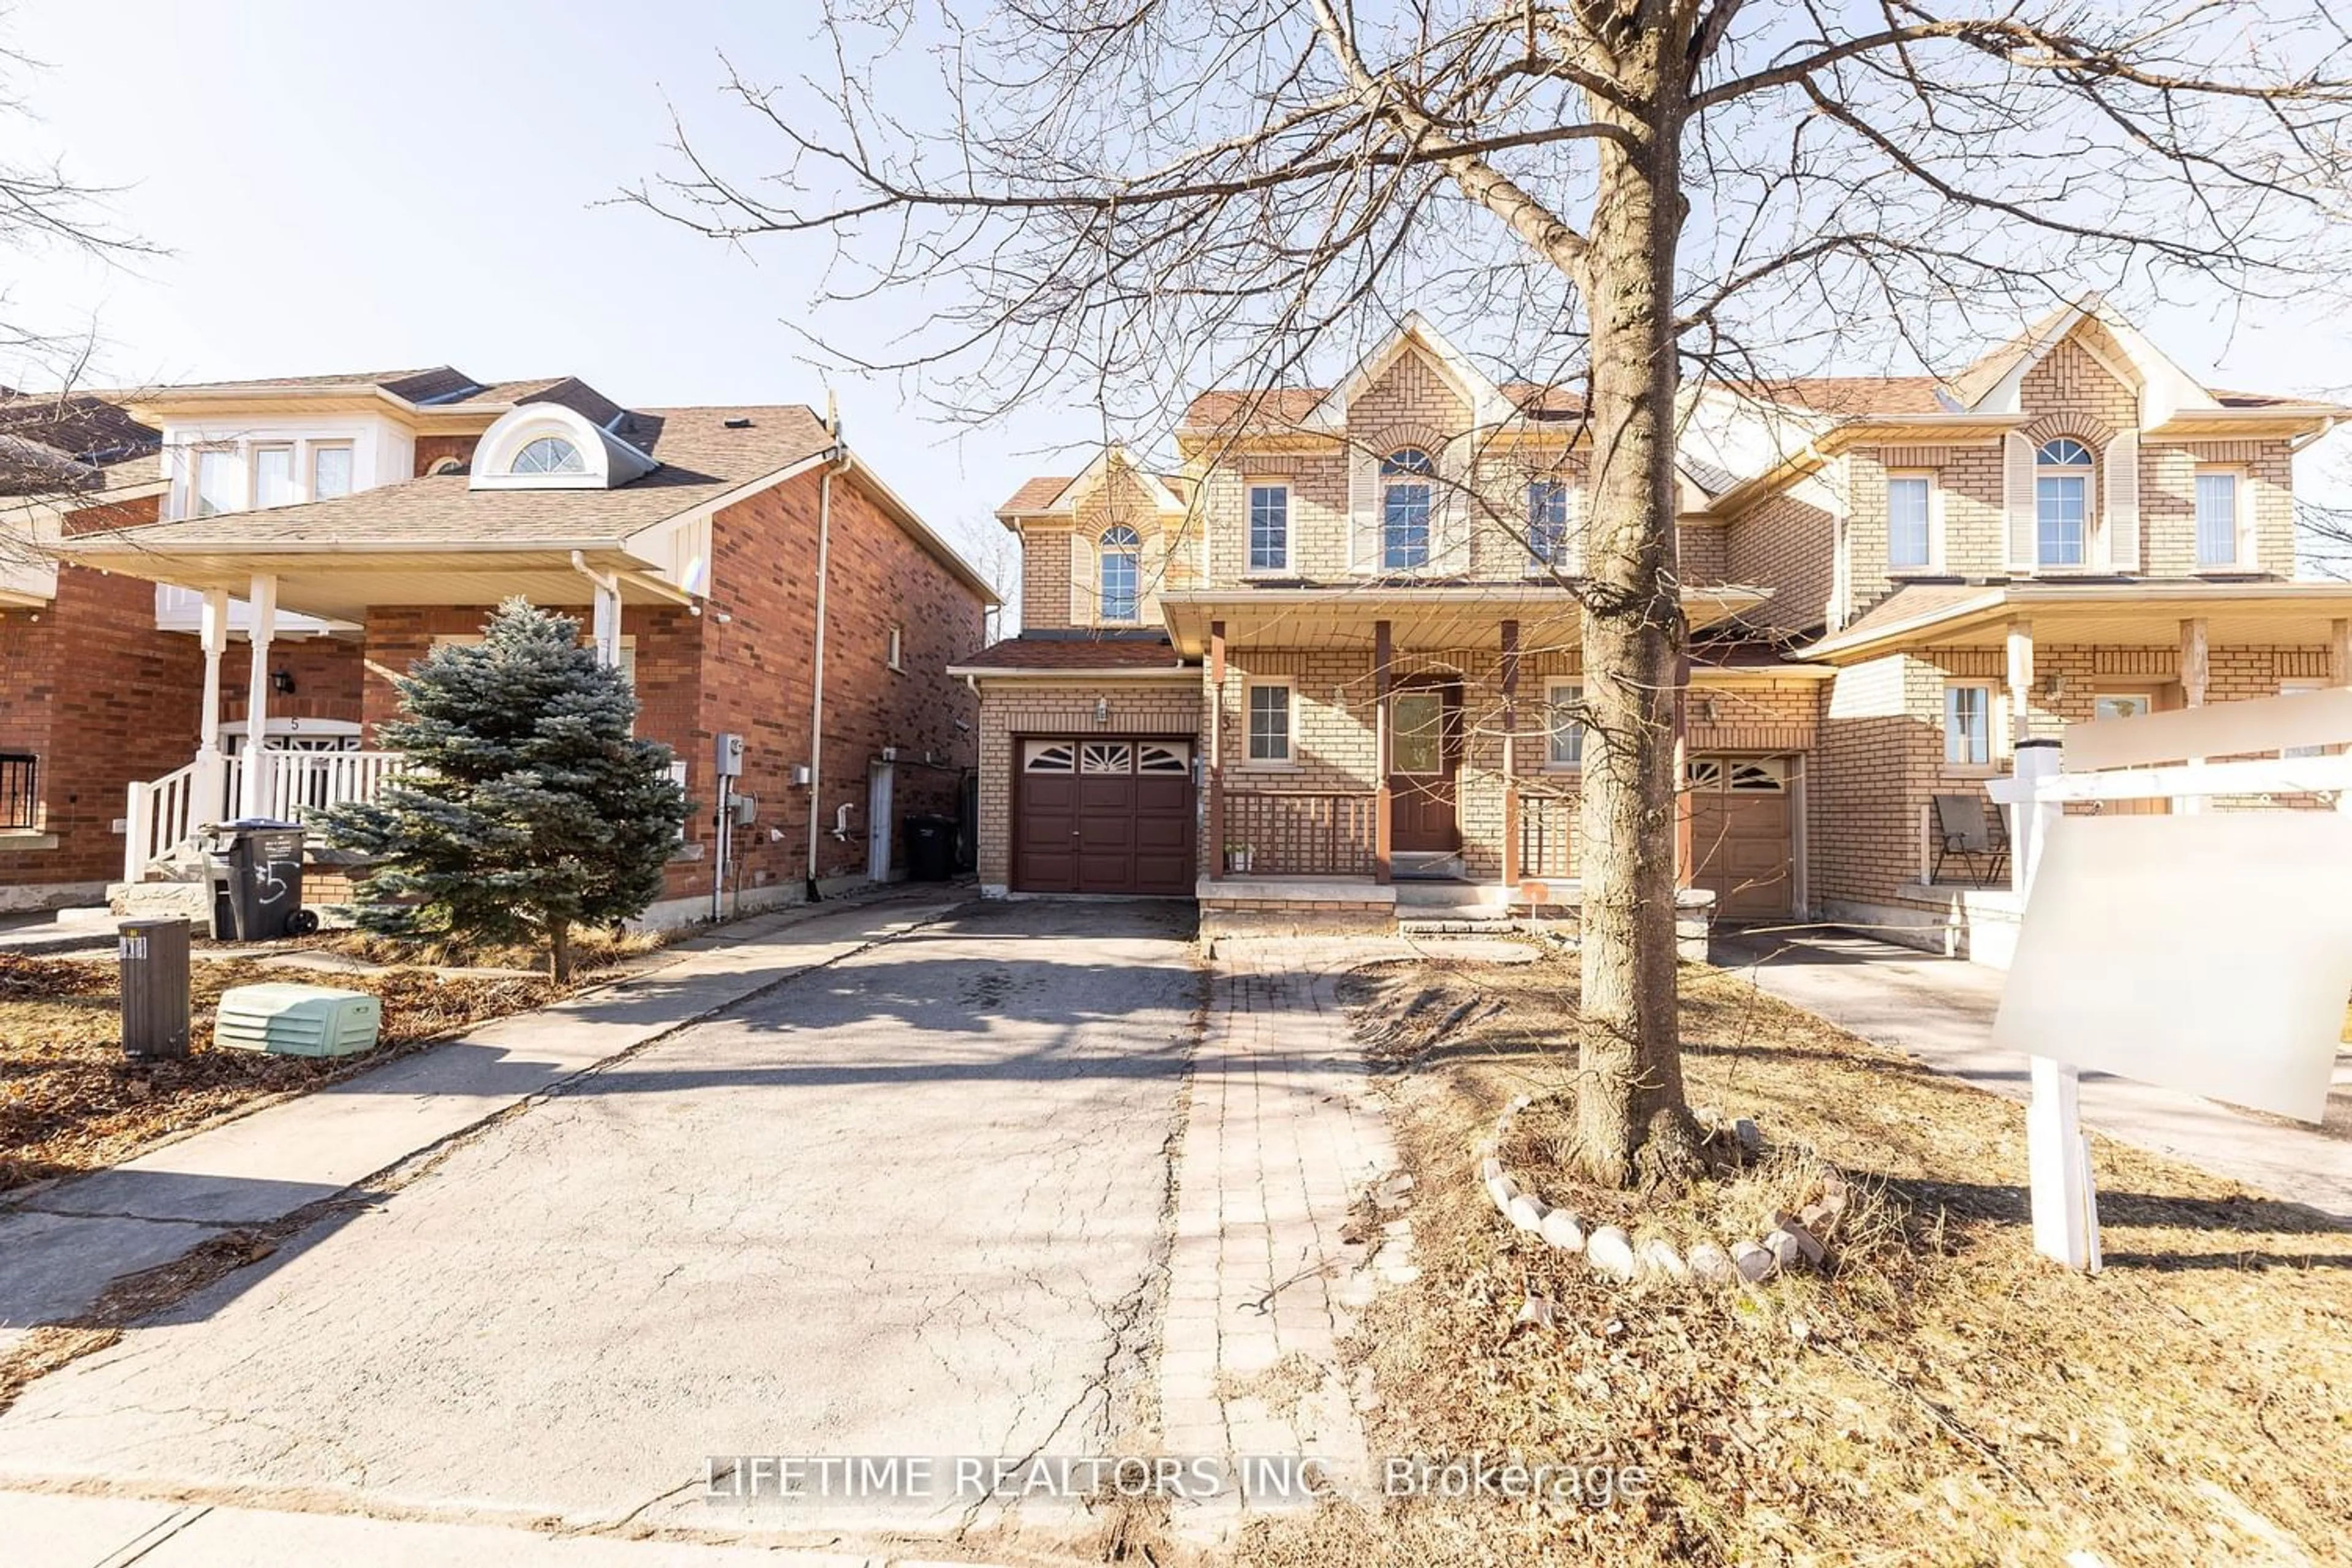 Home with brick exterior material for 3 Giraffe Ave, Brampton Ontario L6R 1Y8